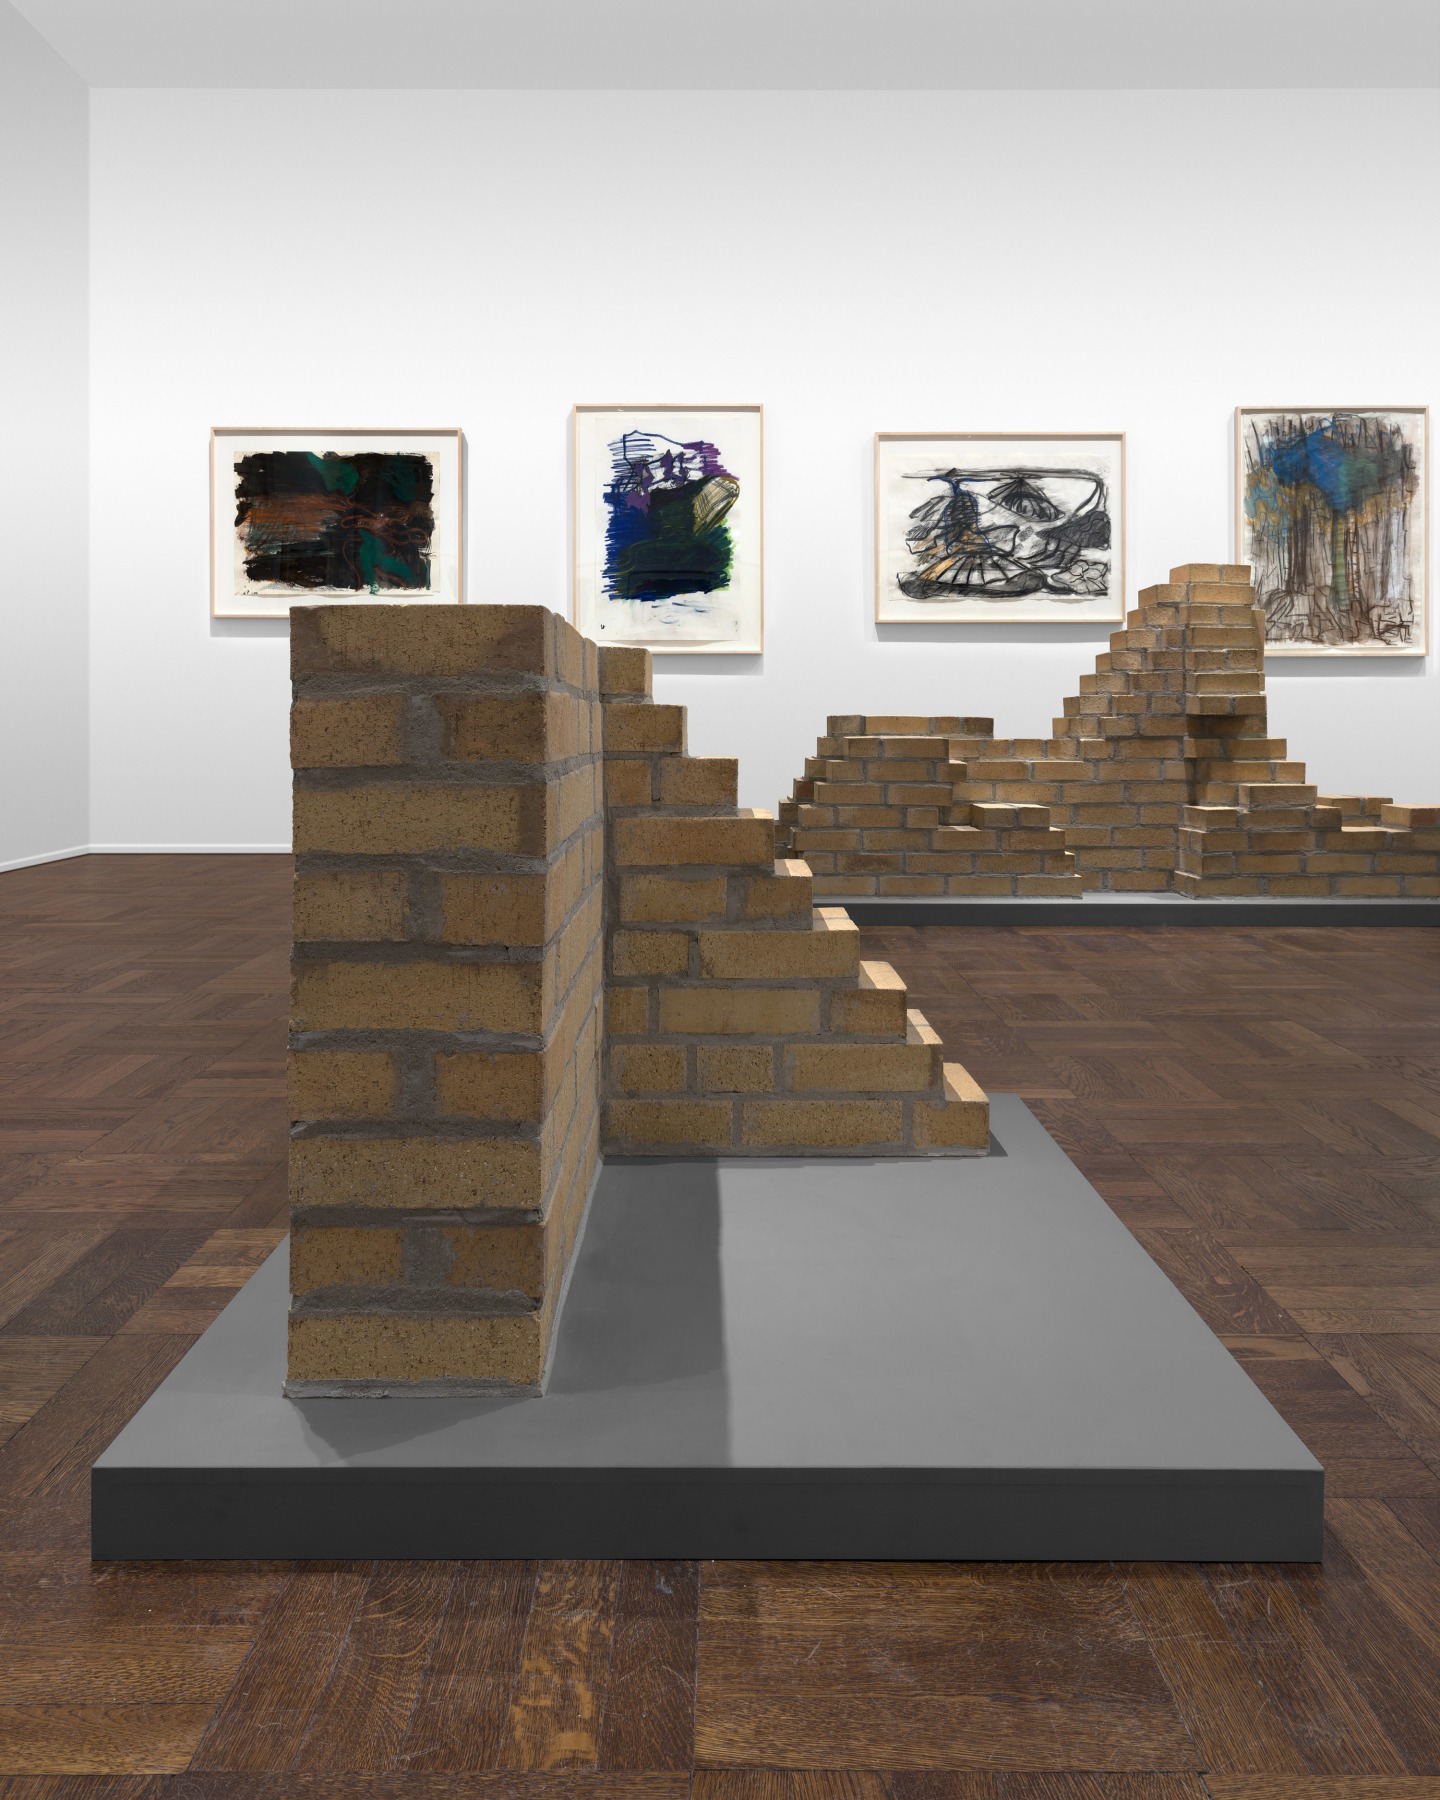 PER KIRKEBY Works on Paper, Works in Brick 20 November 2019 through 25 January 2020 UPPER EAST SIDE, NEW YORK, Installation View 4